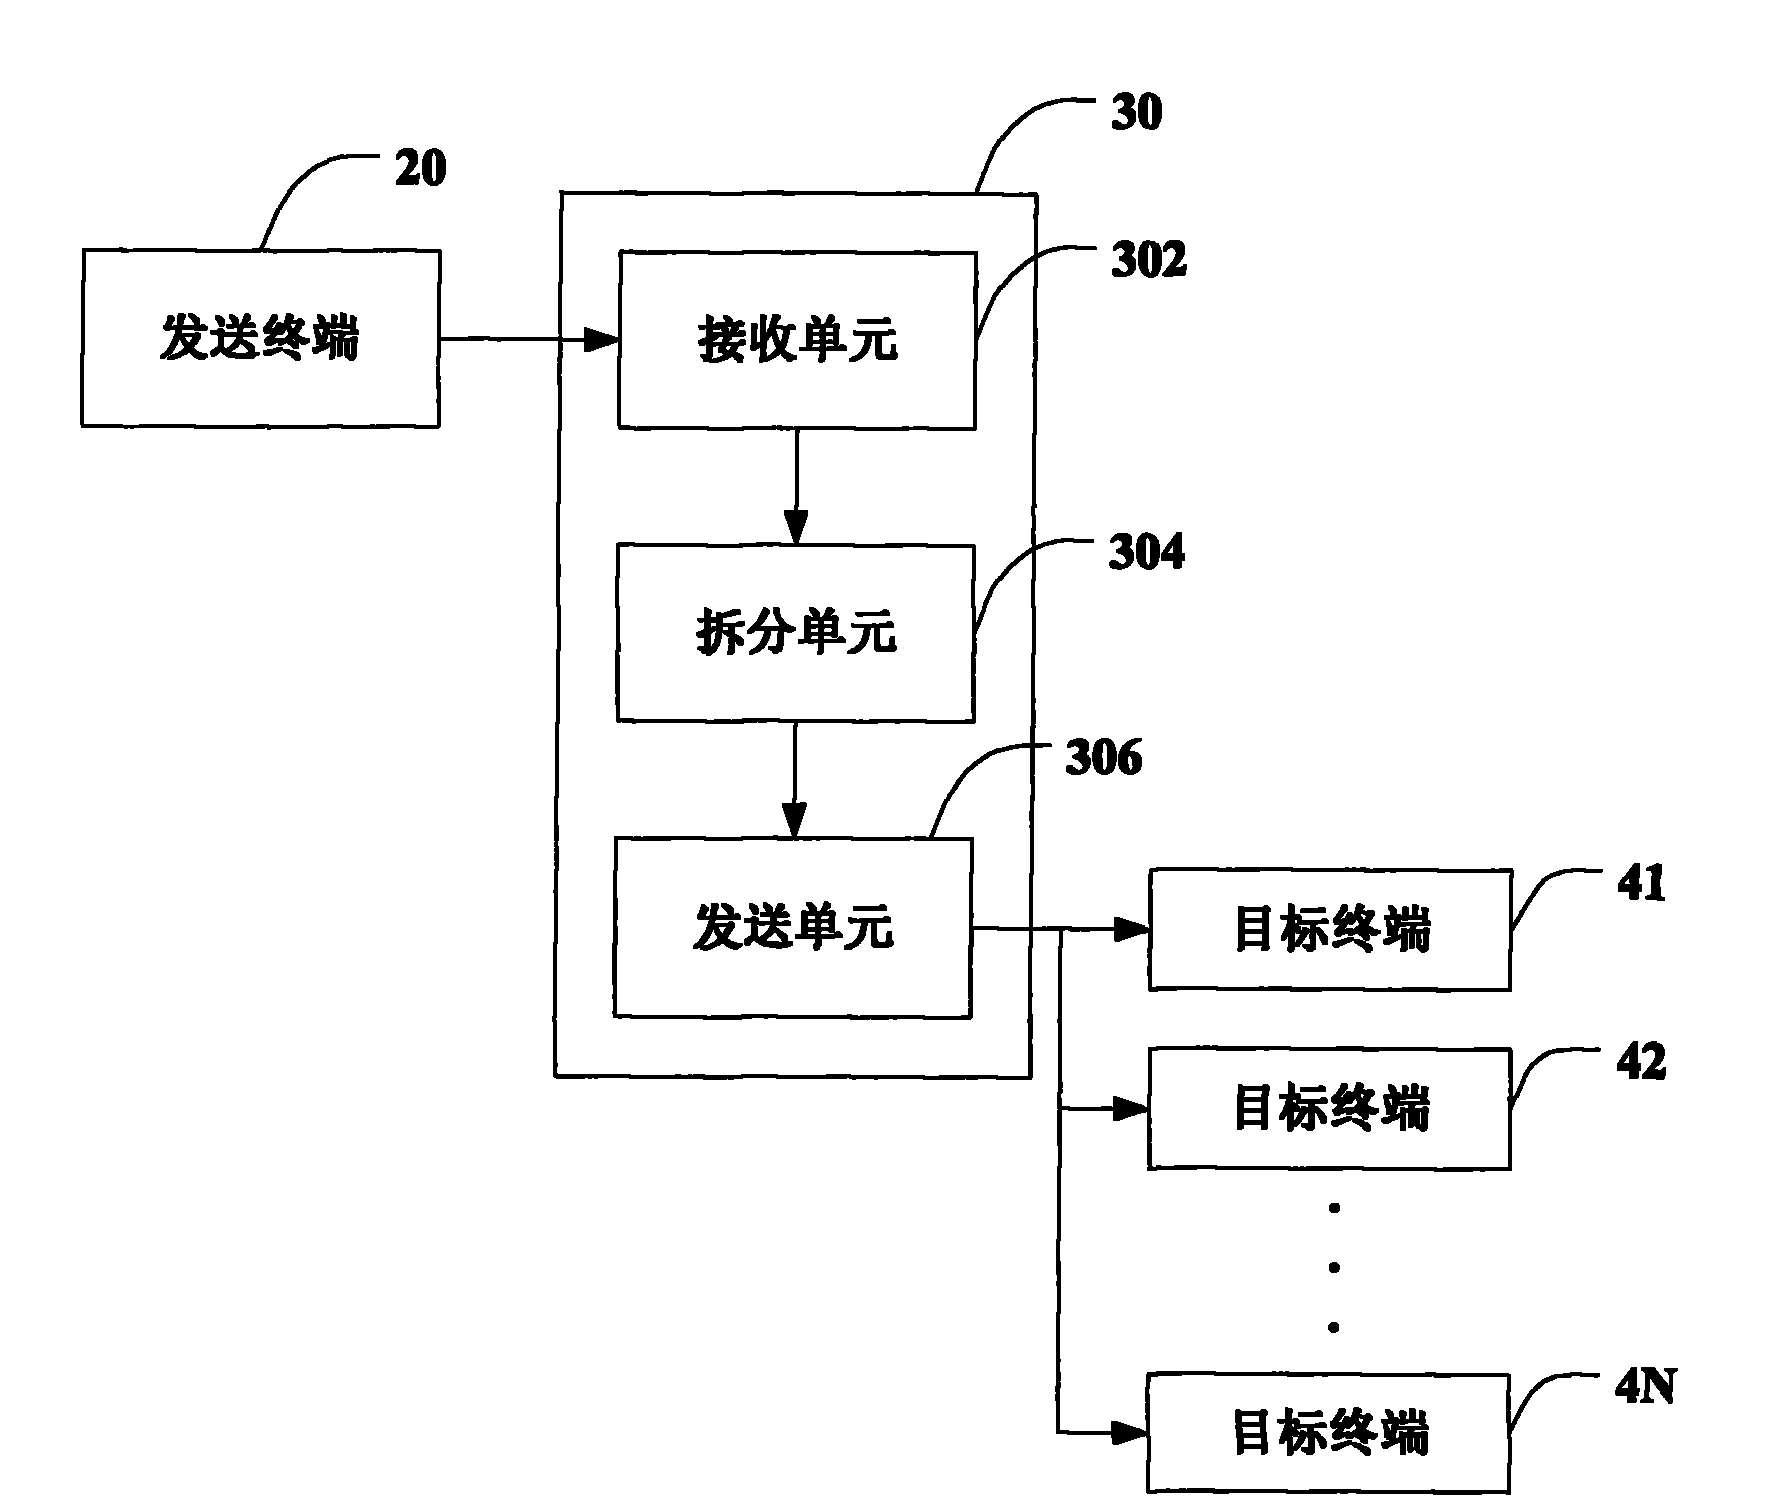 Electronic ticket splitting method and system